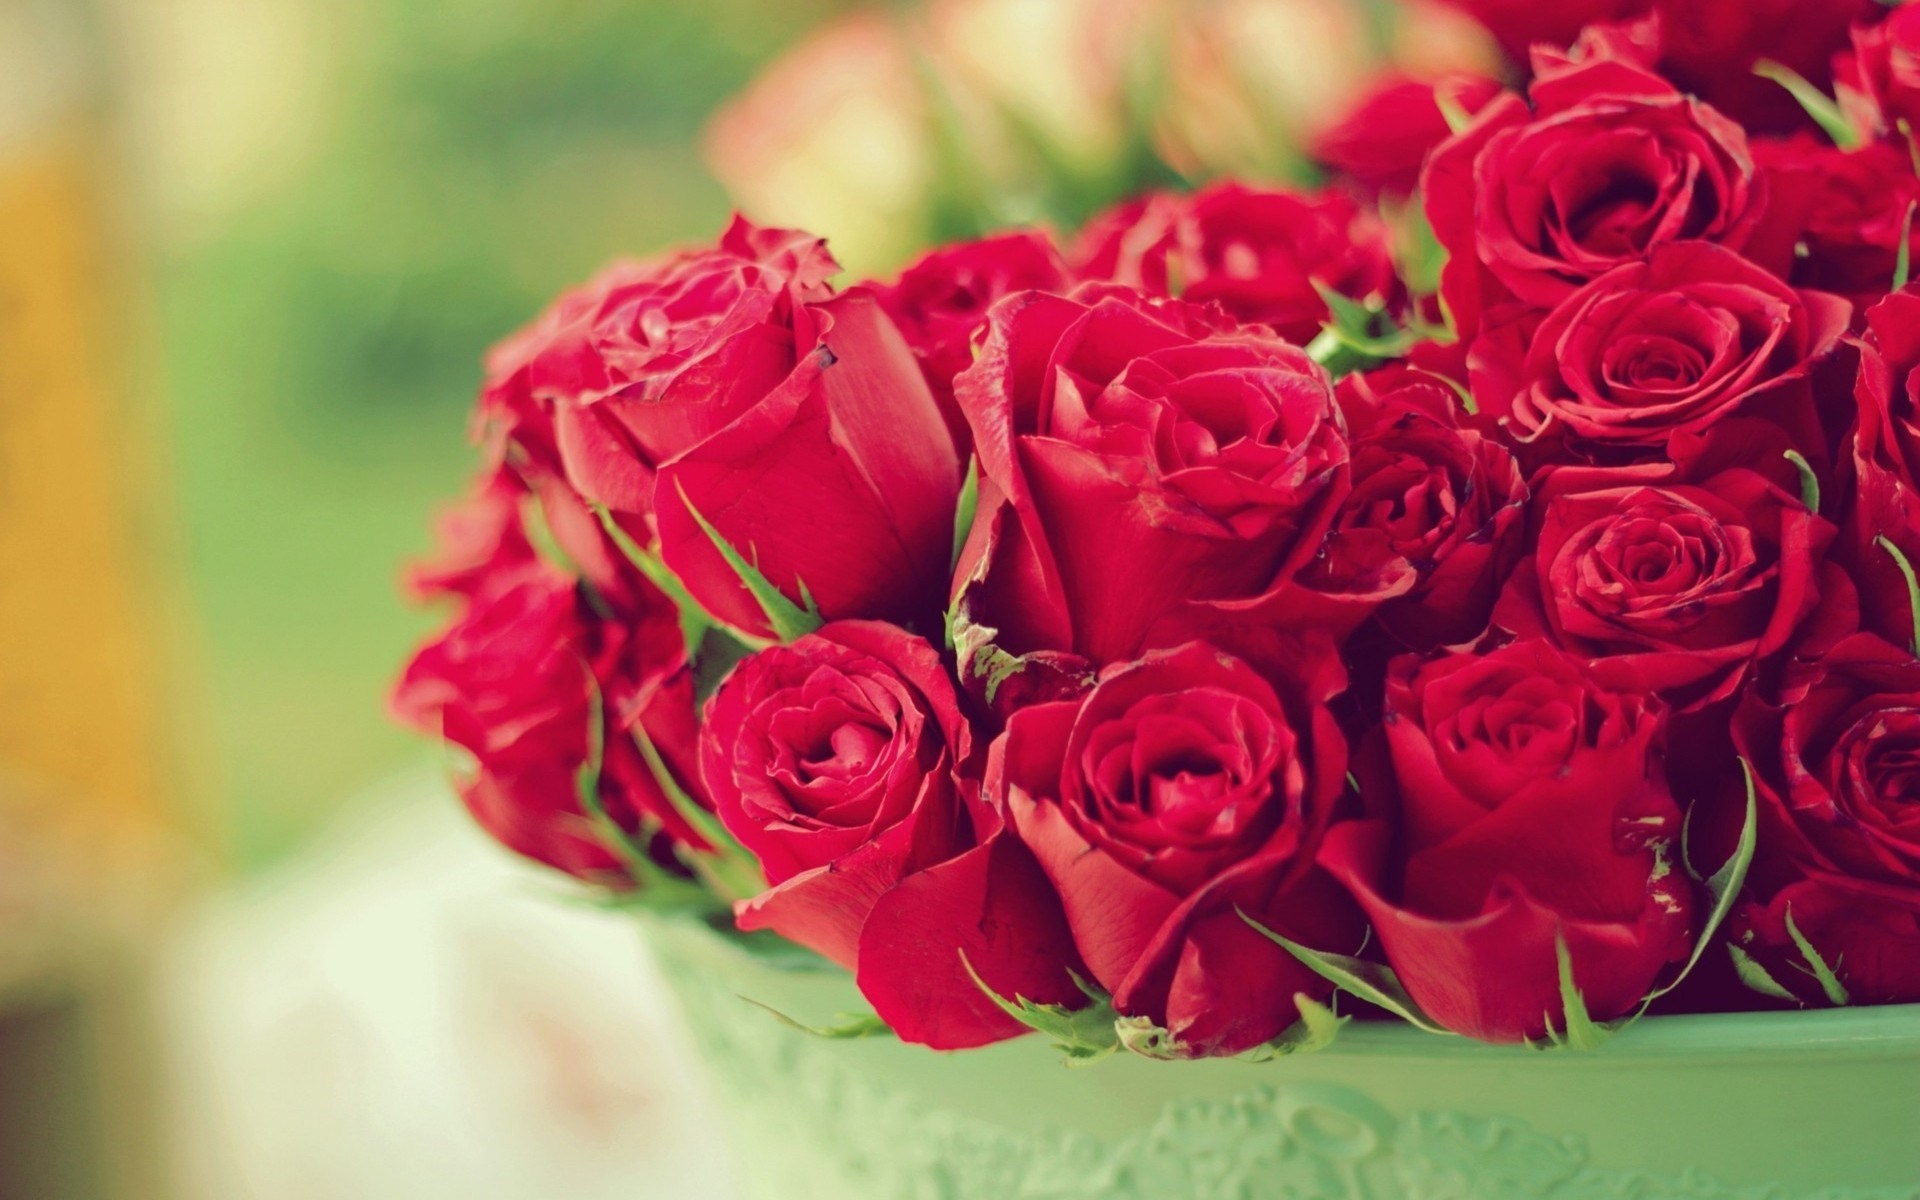 Red Roses Bouquet - Wallpaper, High Definition, High Quality, Widescreen